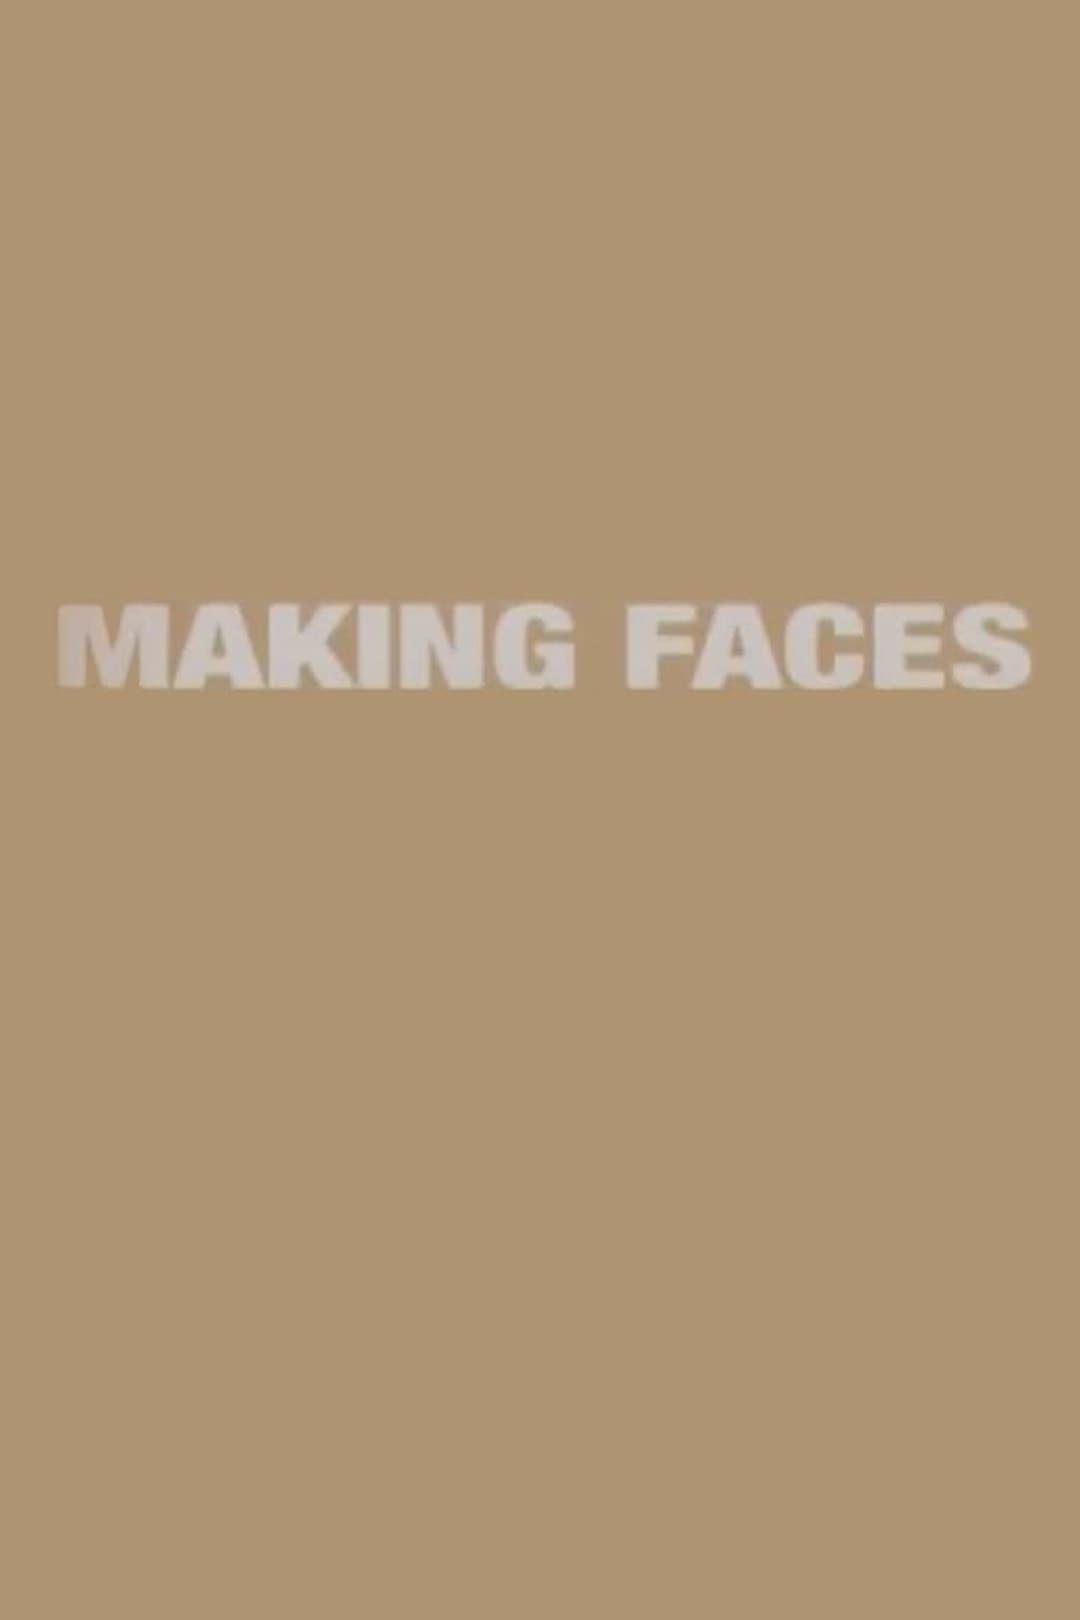 Making 'Faces' poster